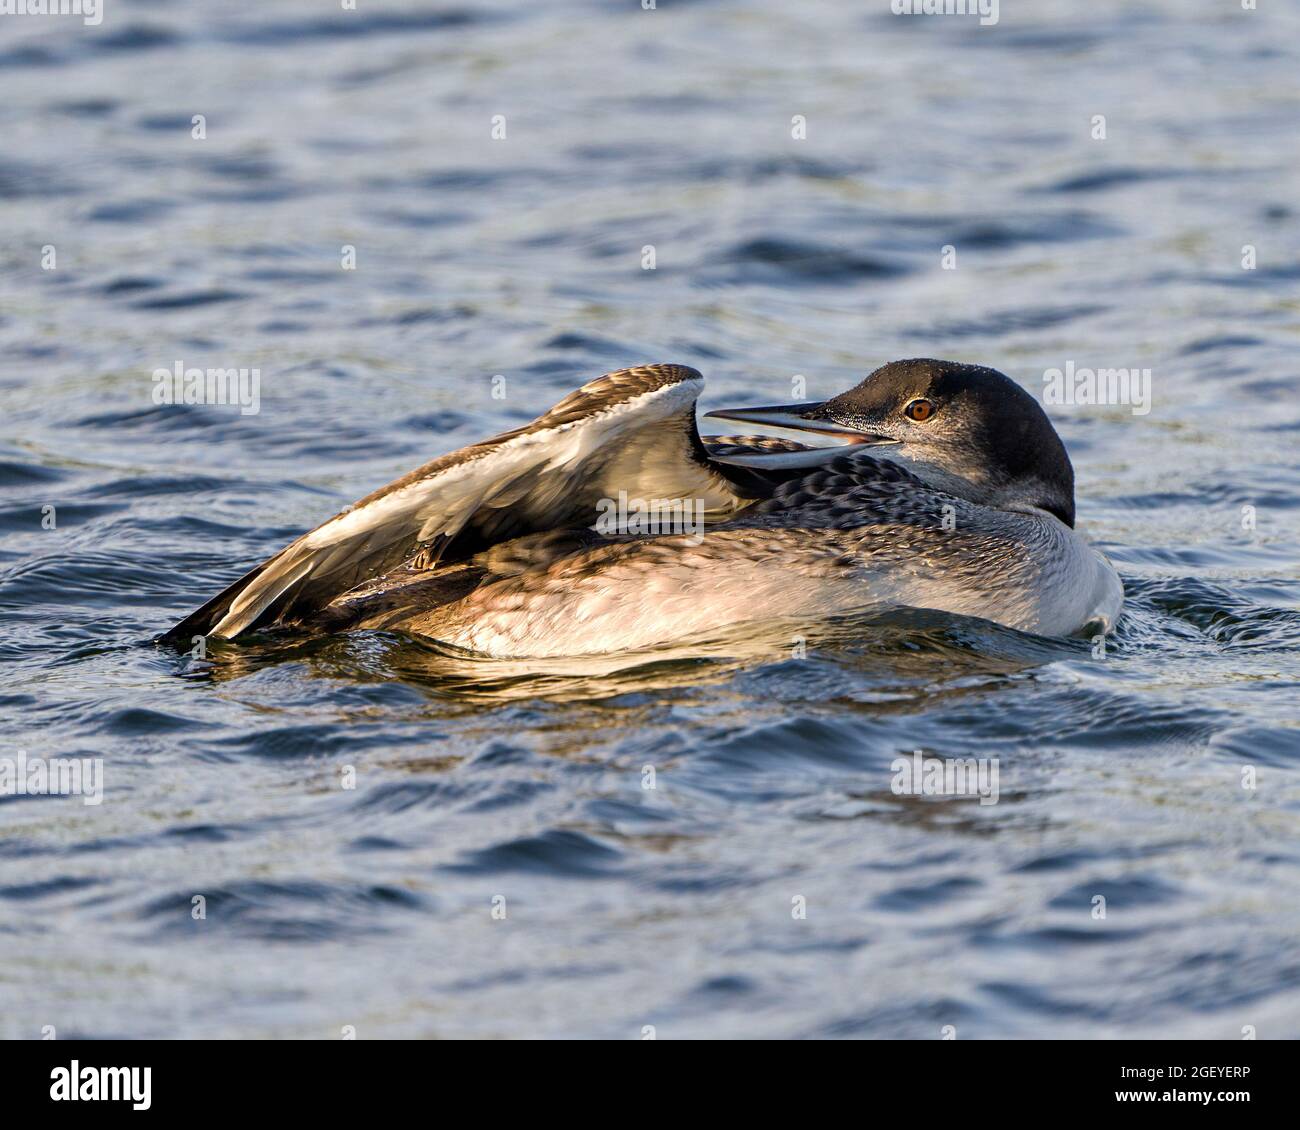 Common Loon young bird close-up profile view swimming in ripple water and cleaning wings in its environment and habitat. Loon Picture. Portrait. Stock Photo